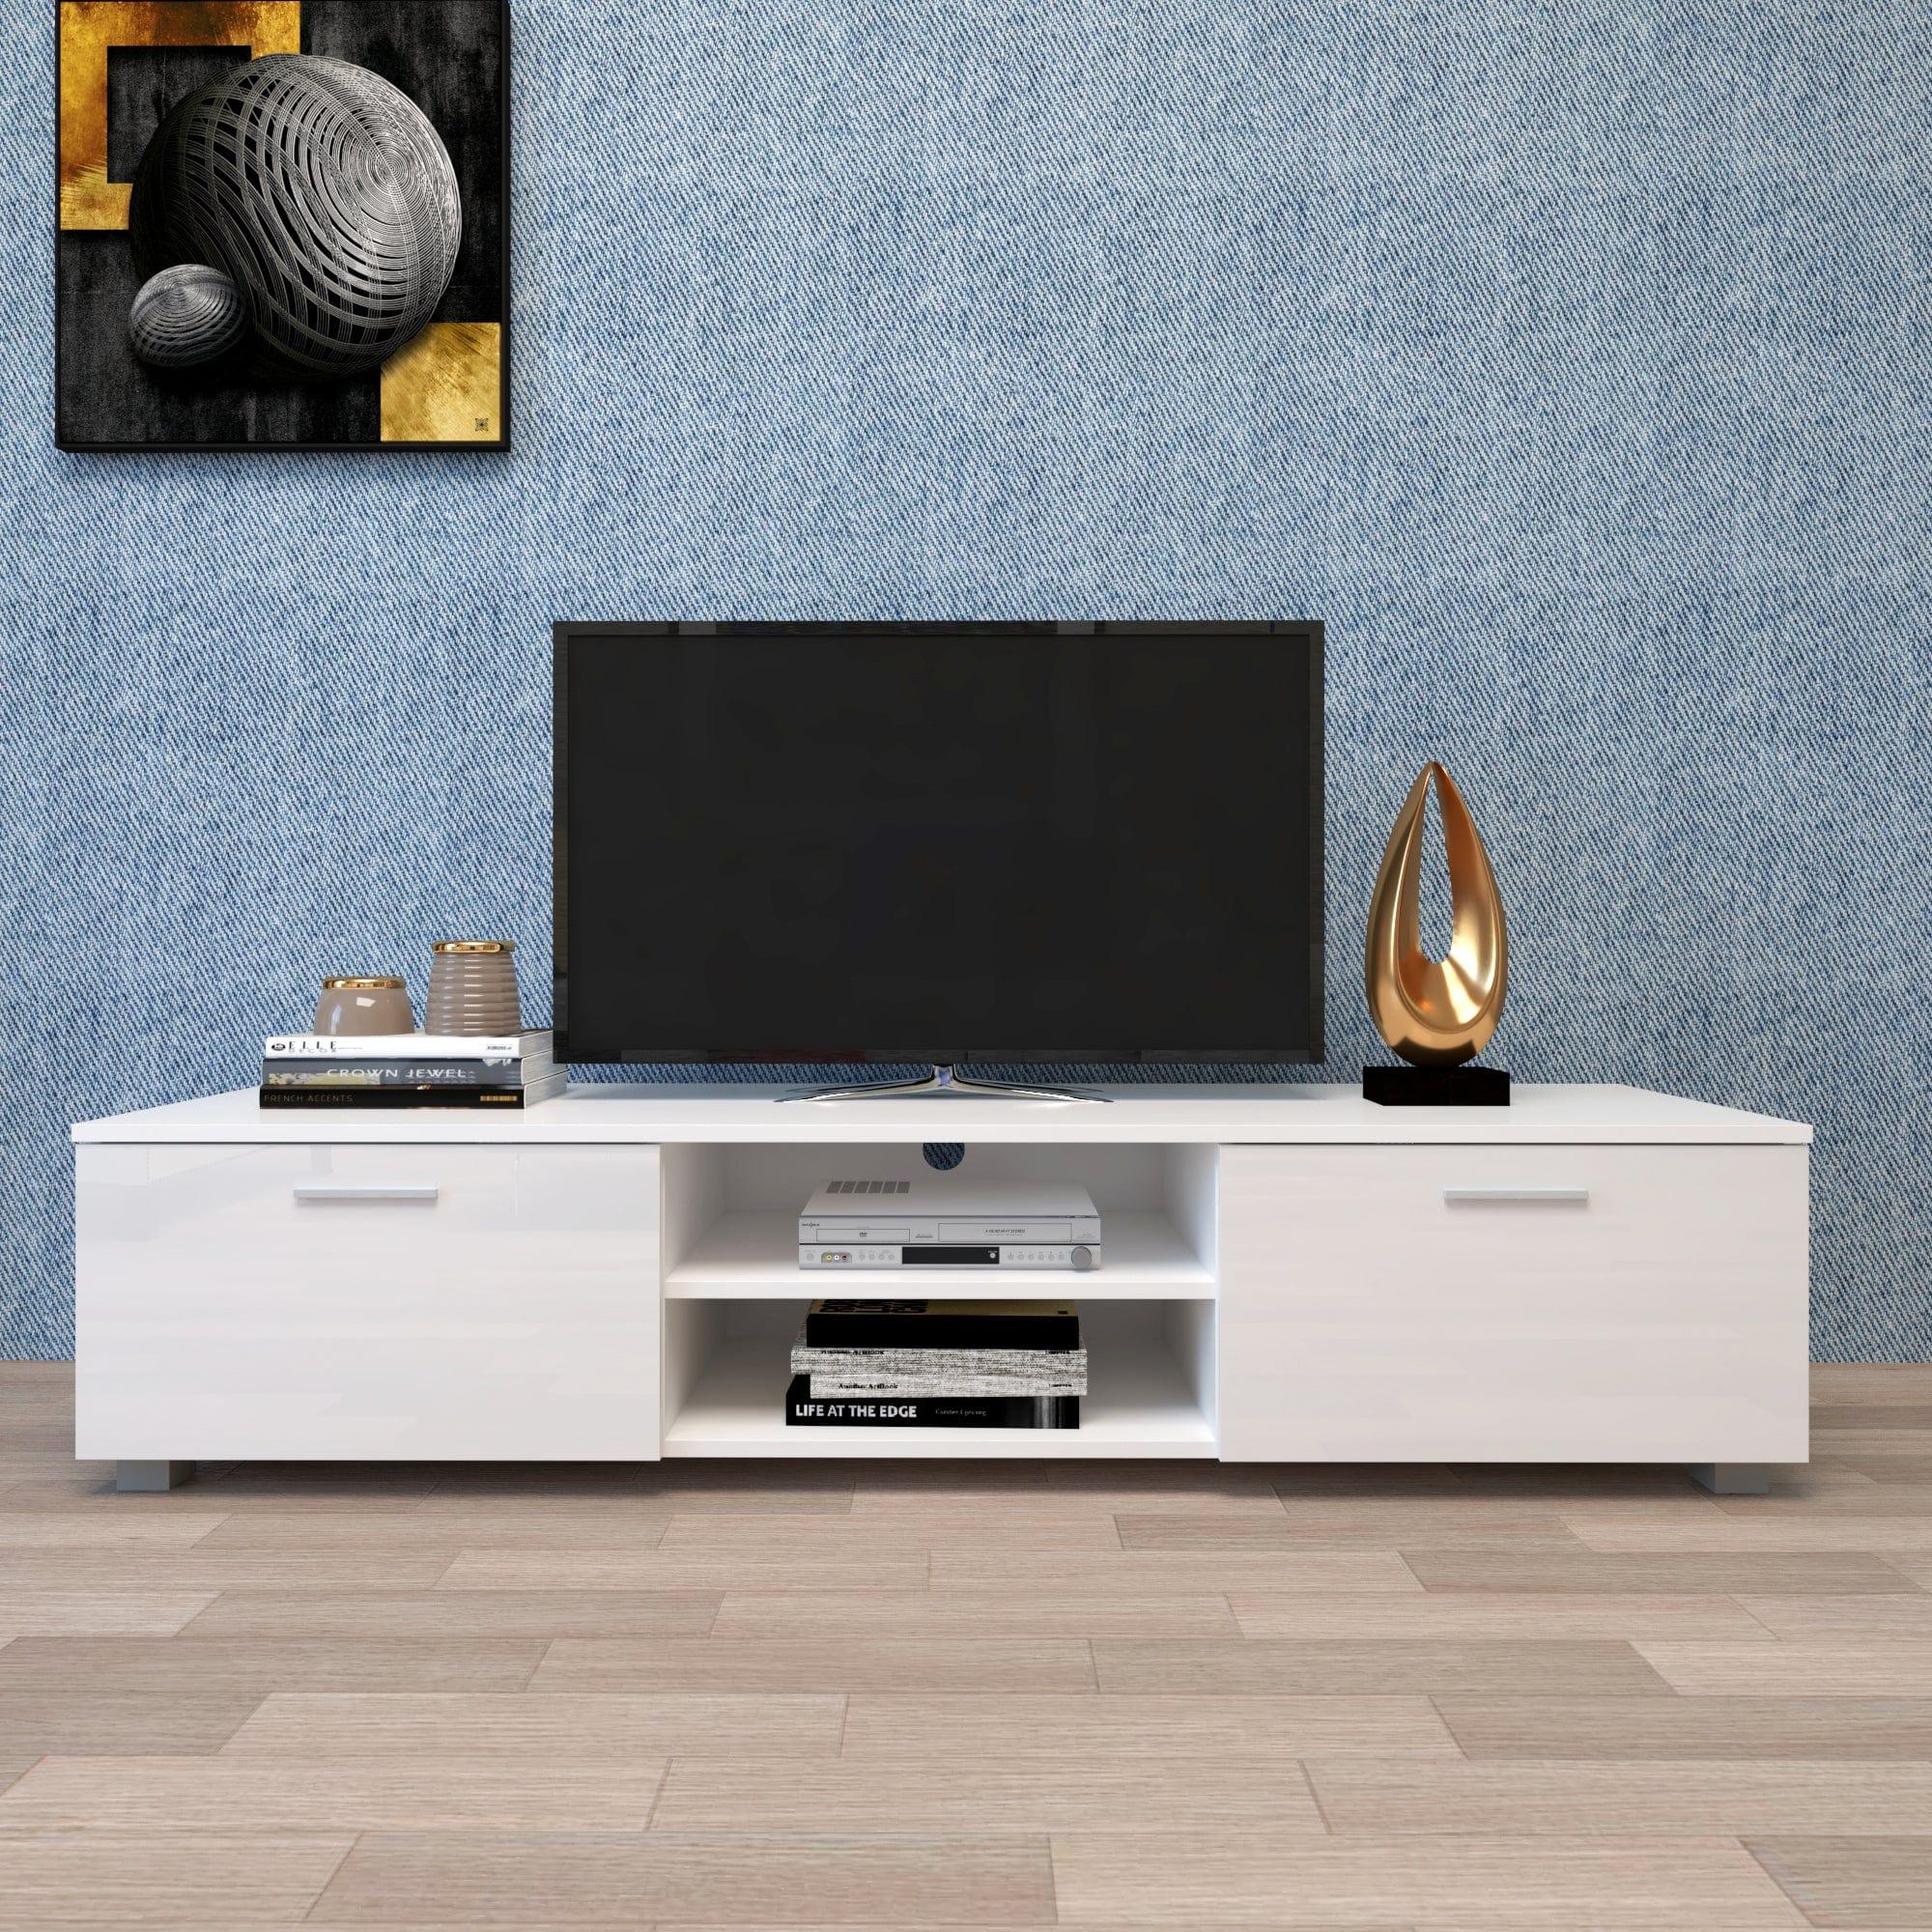 Shop White TV Stand for 70 Inch TV Stands, Media Console Entertainment Center Television Table, 2 Storage Cabinet with Open Shelves for Living Room Bedroom Mademoiselle Home Decor